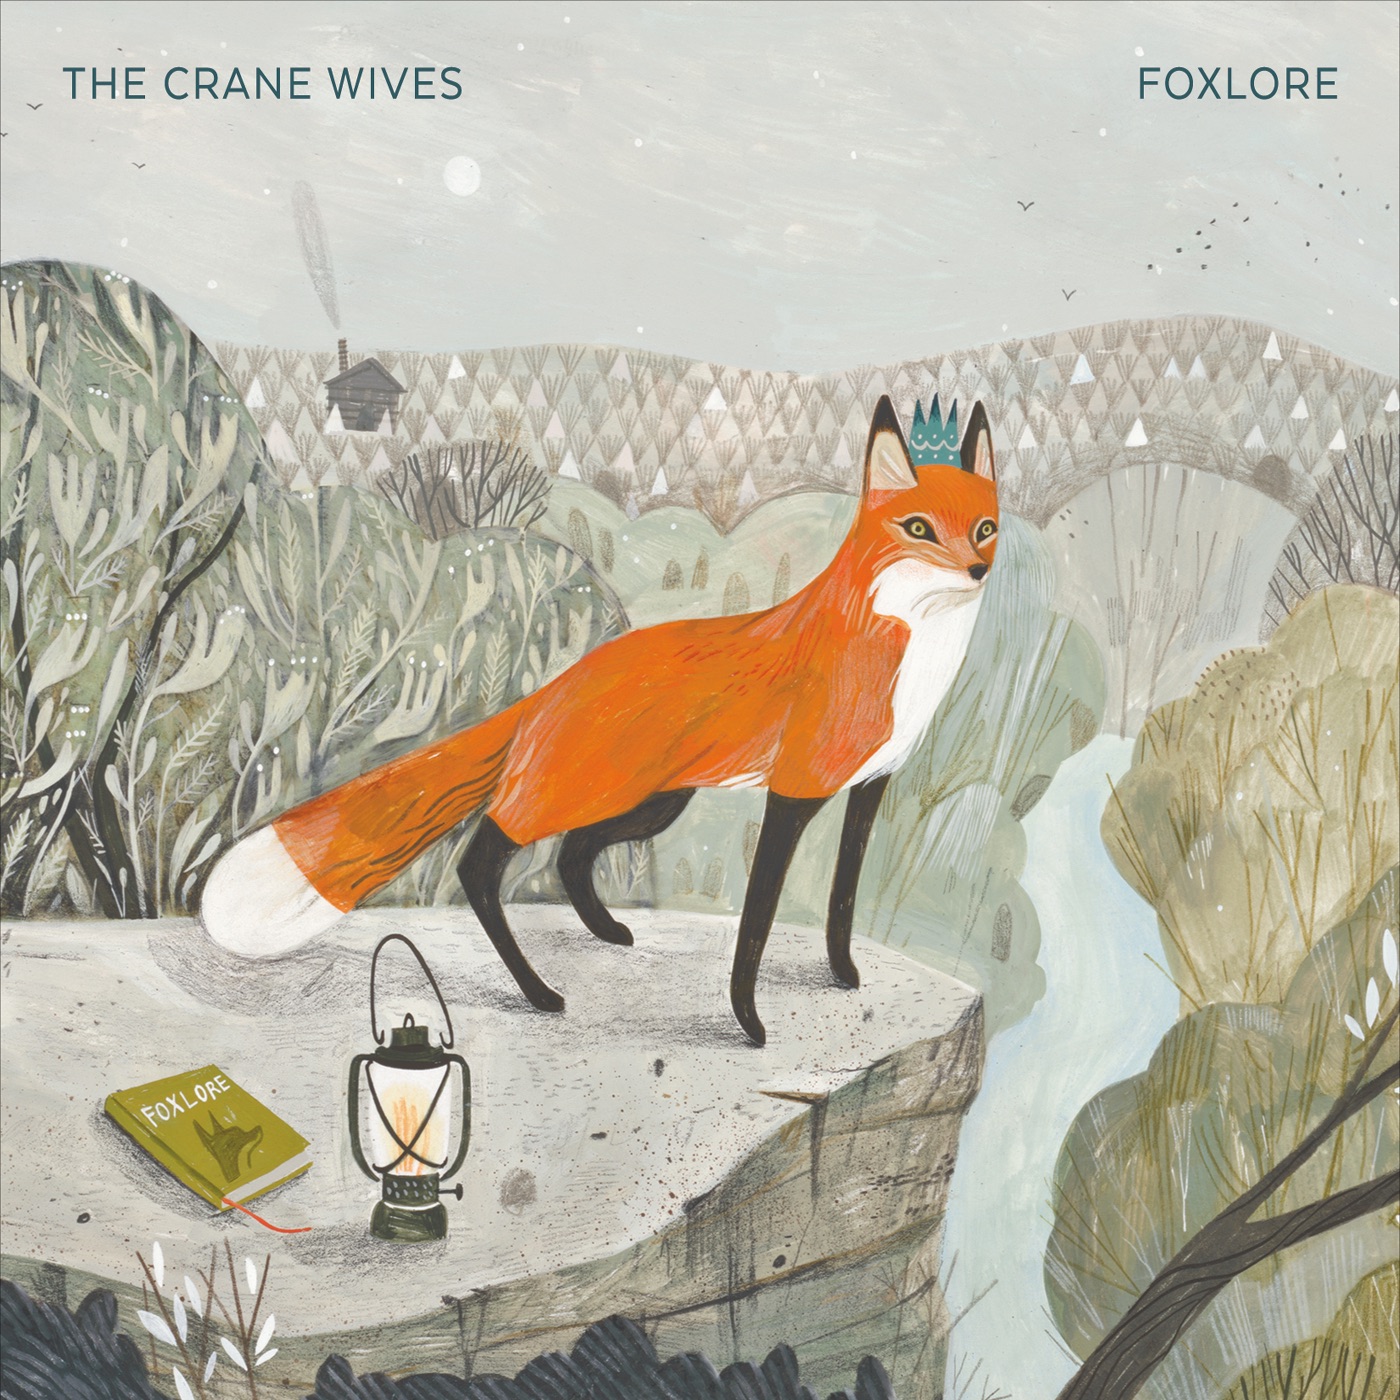 Foxlore by The Crane Wives